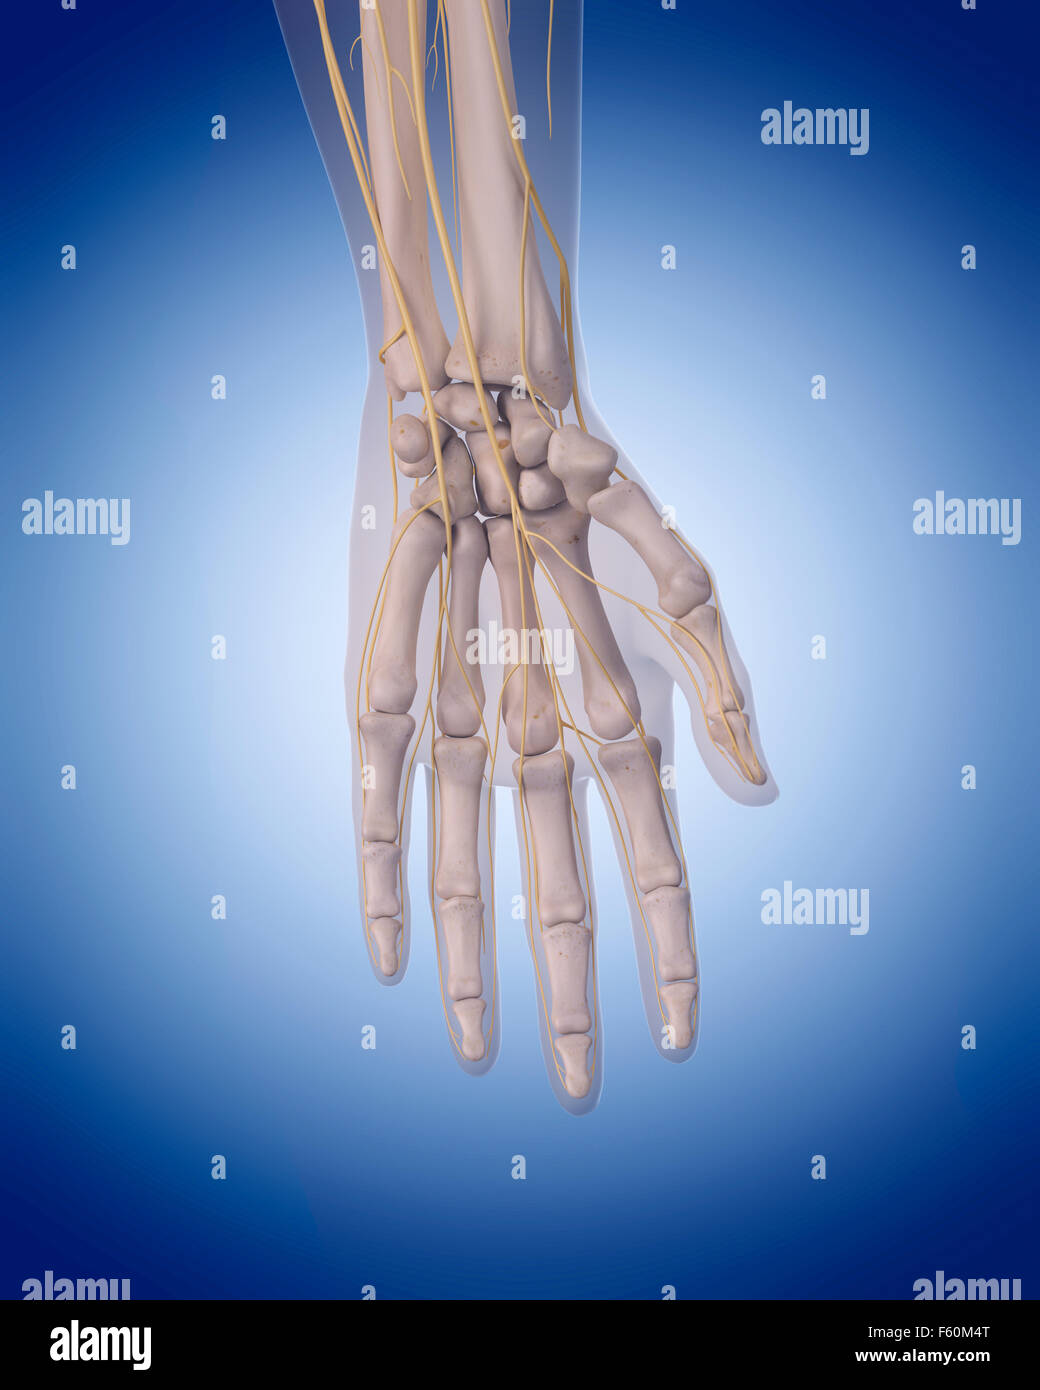 Nerves Hand High Resolution Stock Photography and Images - Alamy